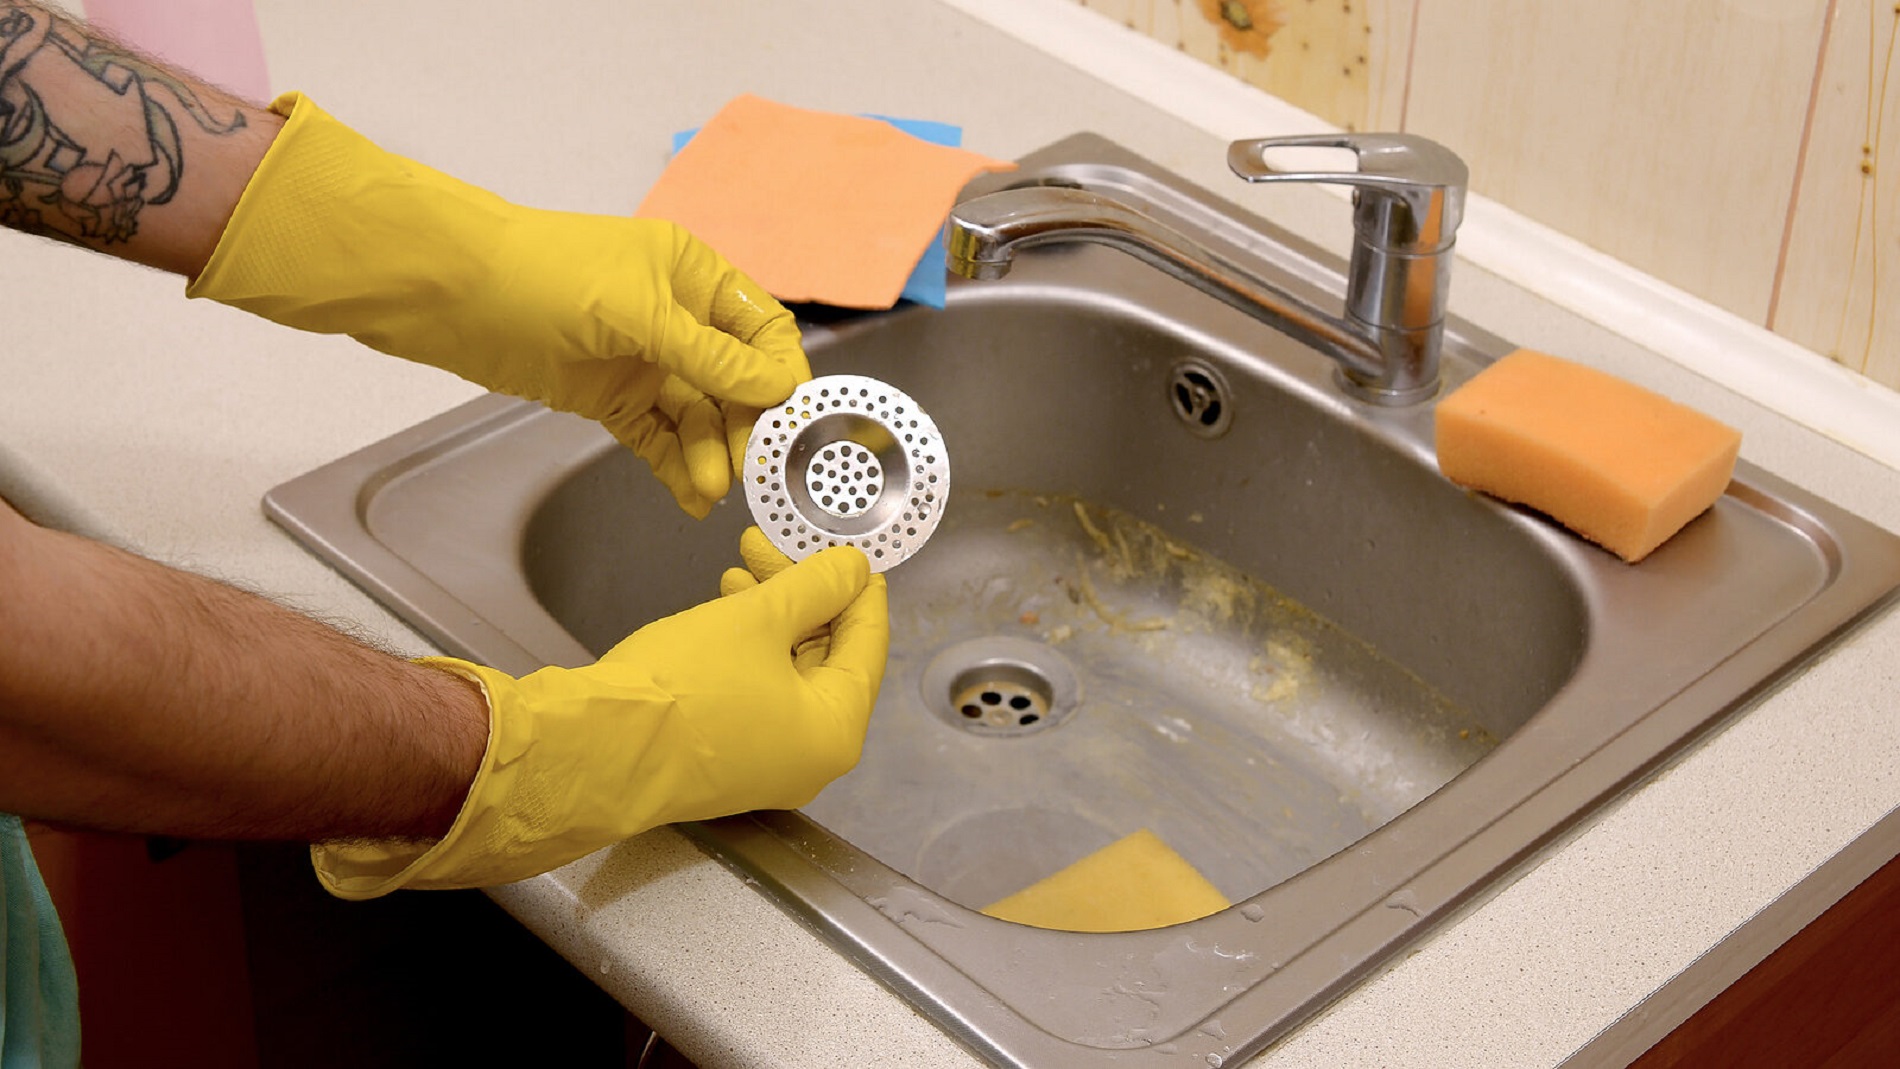 Cleaner In Rubber Gloves Shows Clean Plughole Protector Of A Kitchen Sink Edited